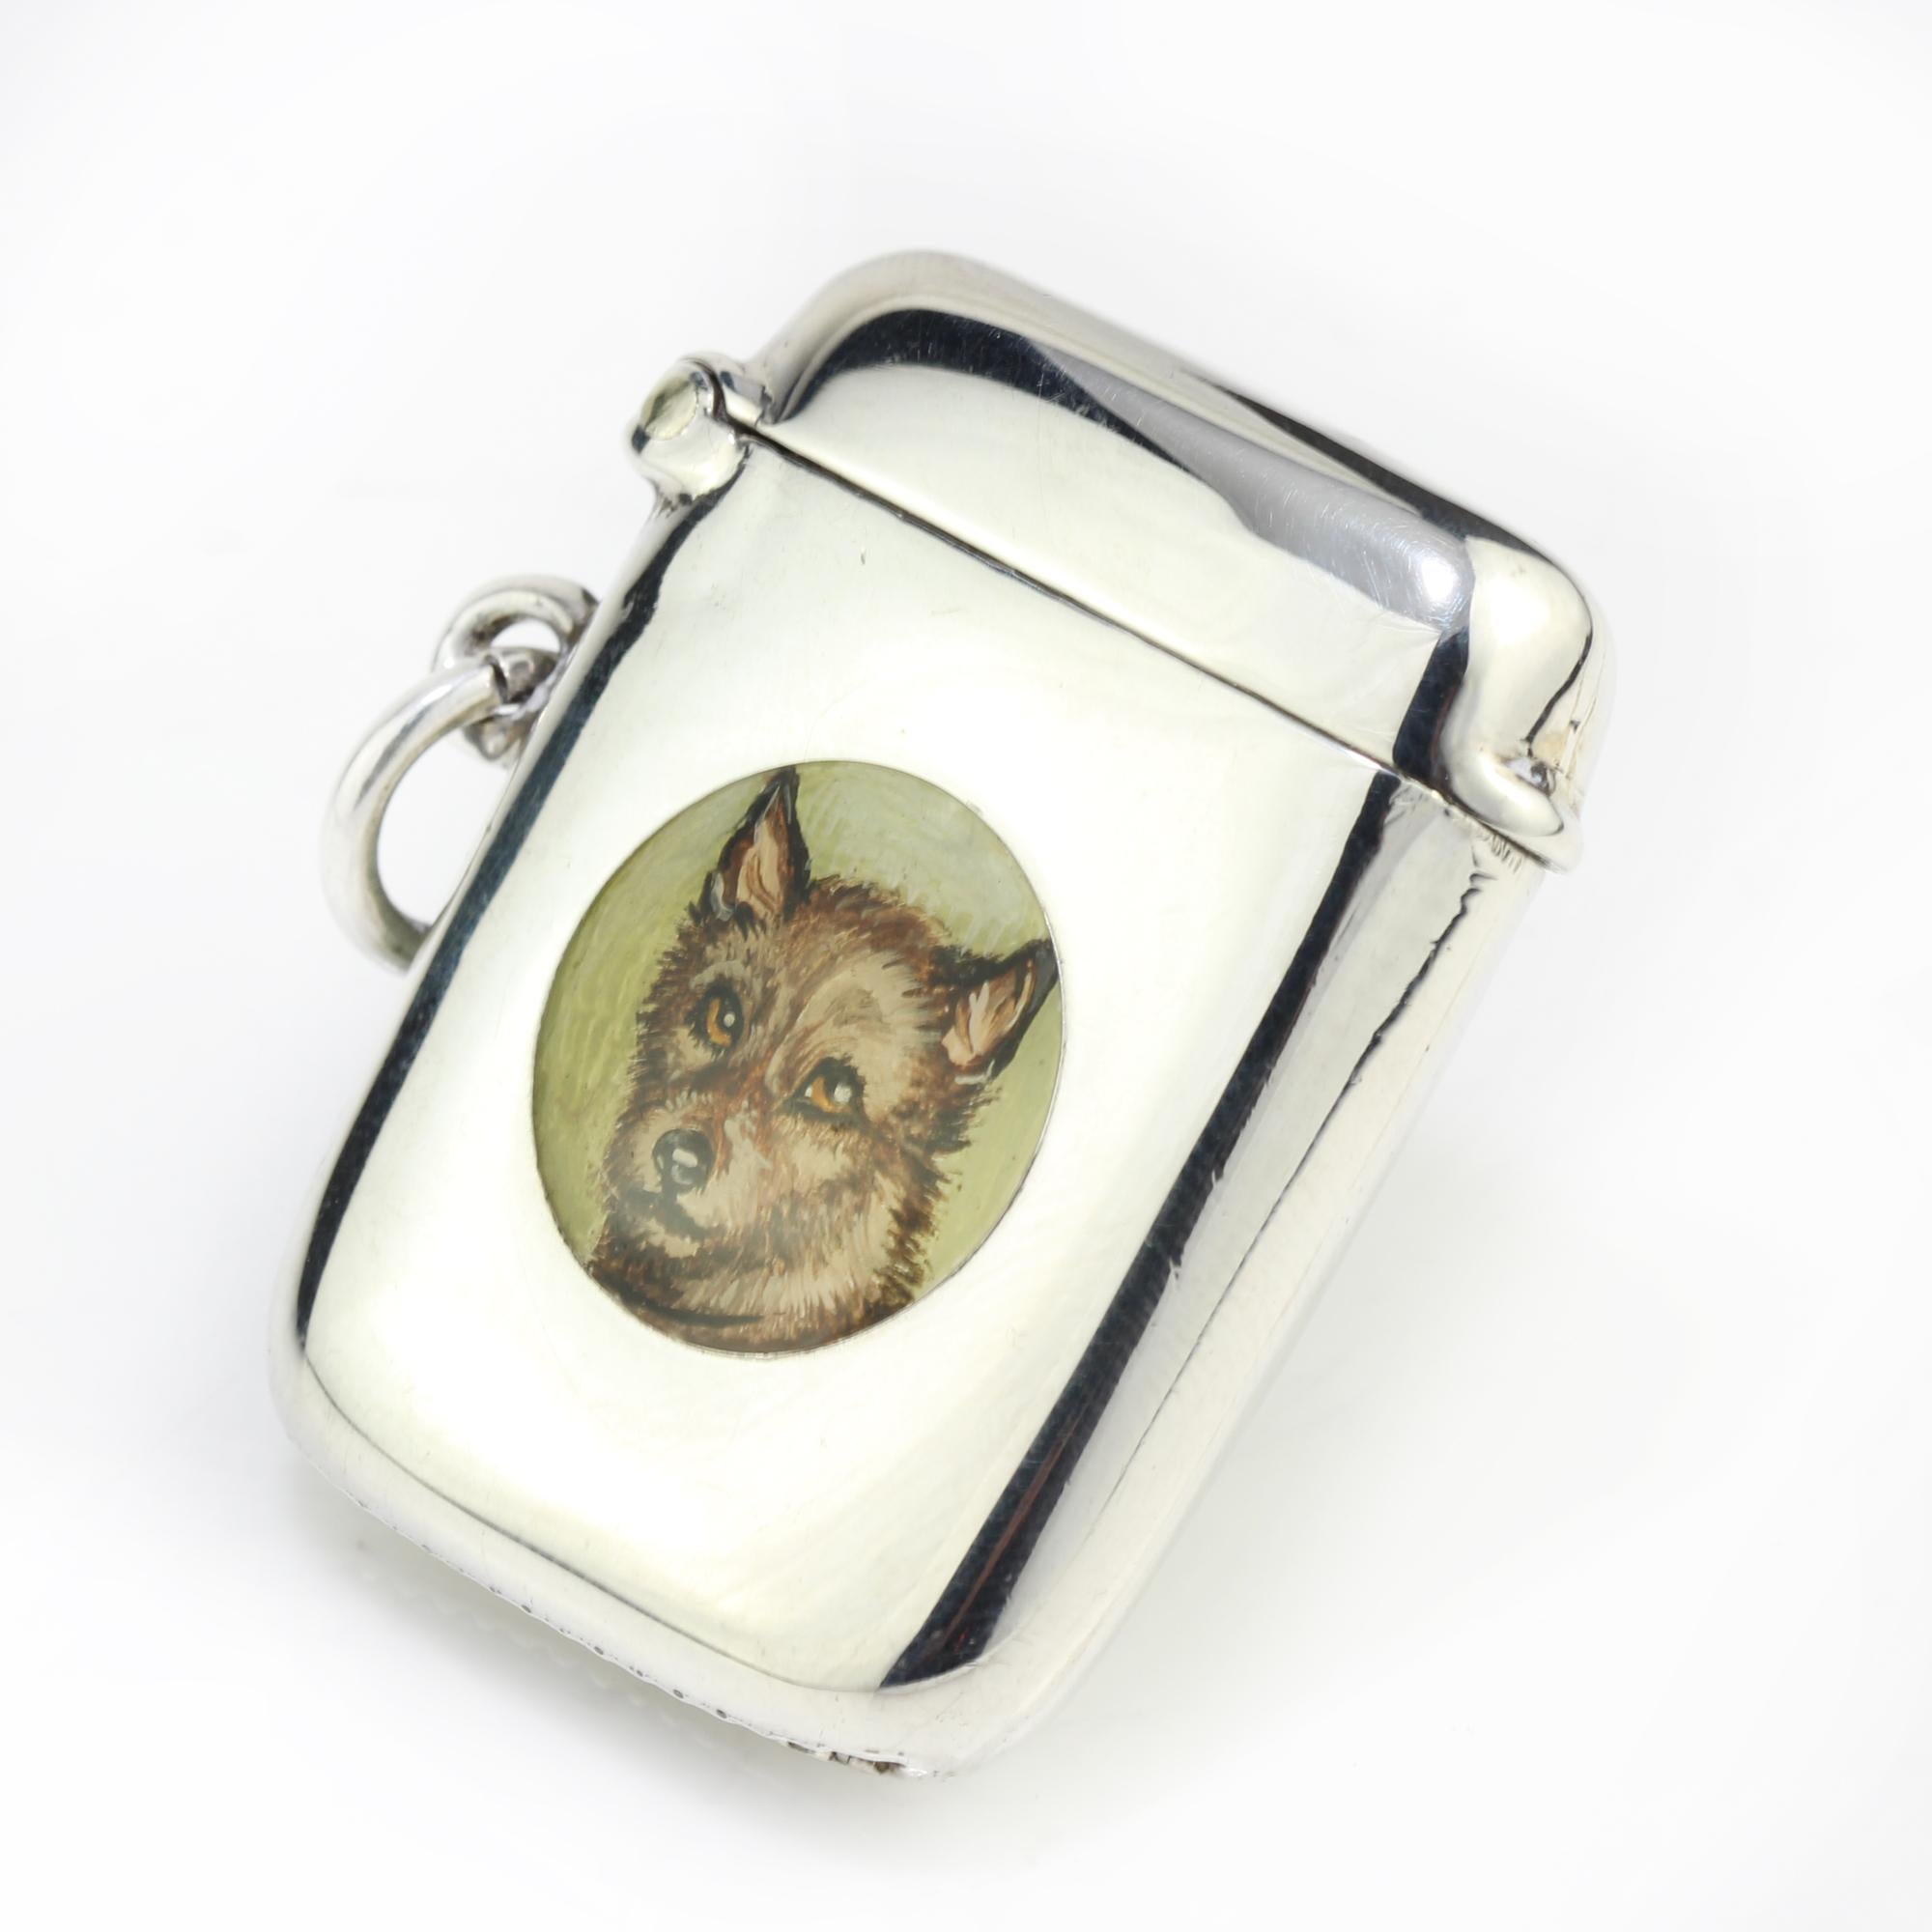 Antique sterling silver vesta case with enamel portrait of dog
Made in Birmingham 1913
Maker: W J Myatt & Co 

Dimensions - 
Size: 3.6 x 3 x 0.8 cm
Weight: 15 grams

Condition: Minor signs of usage and age, great overall condition.